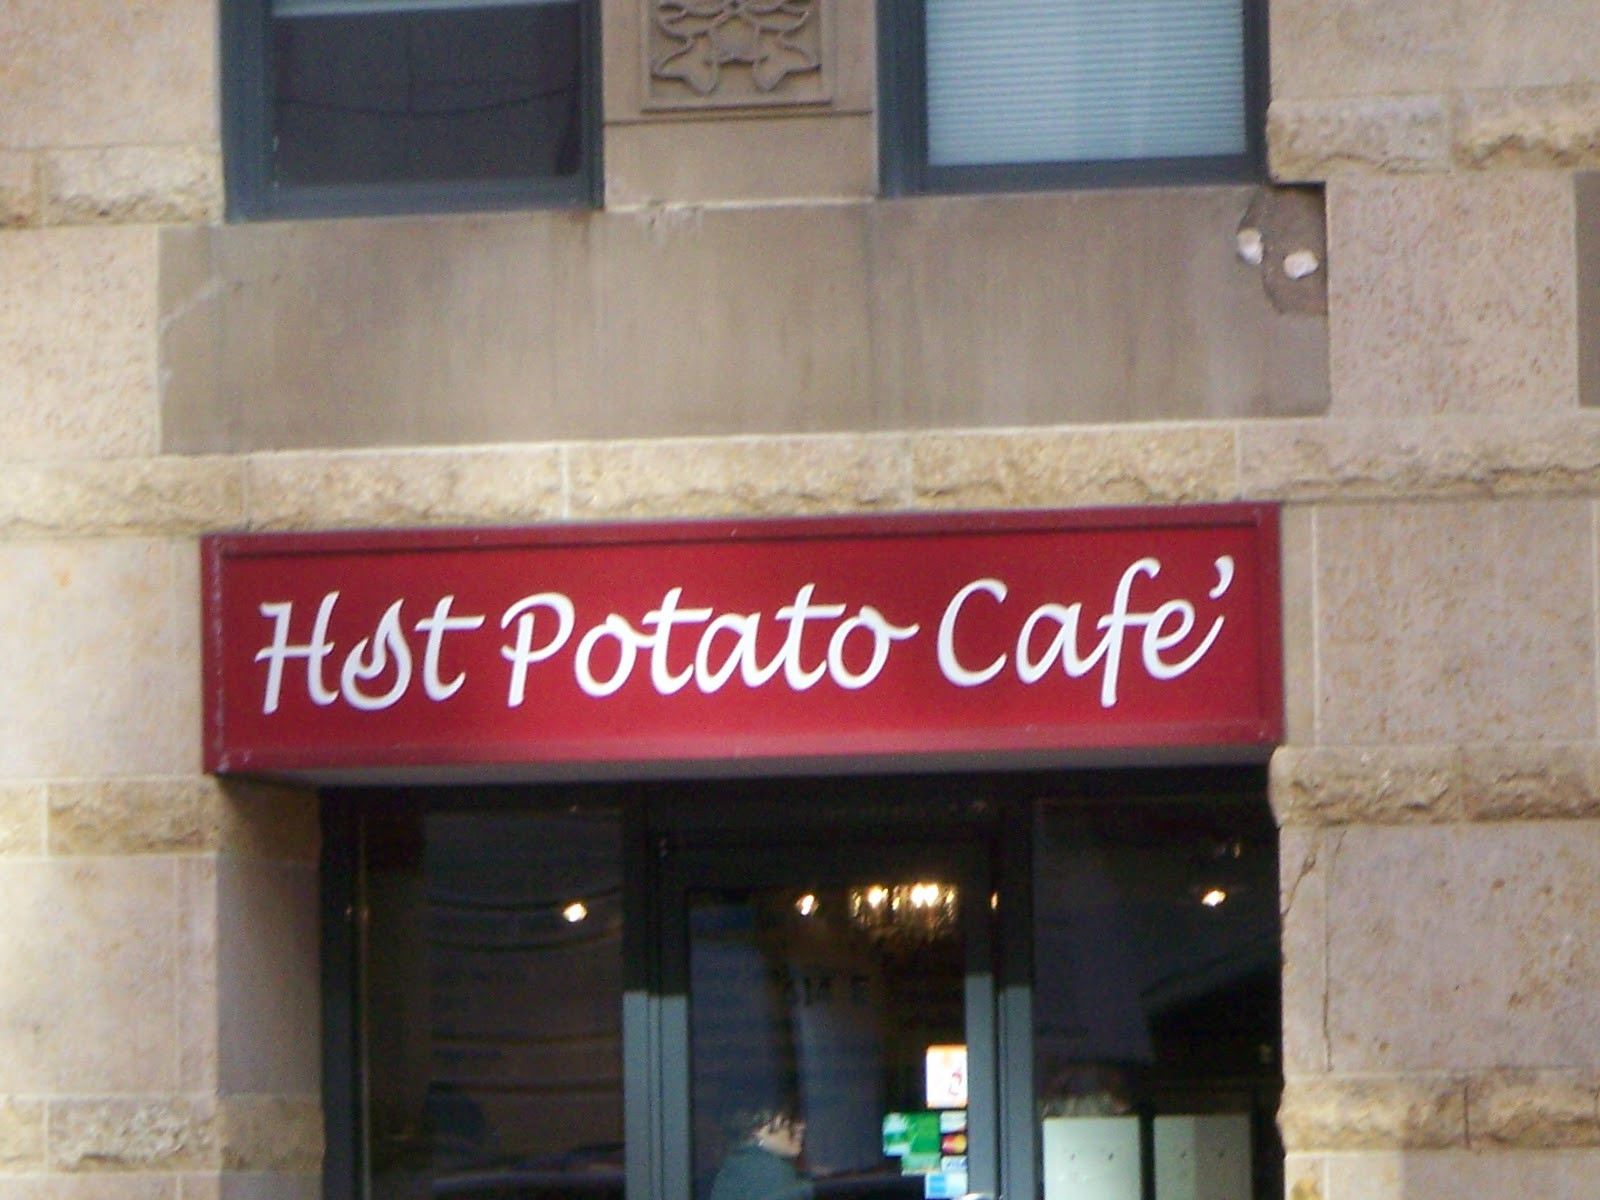 Hot Potato Cafe
 Hosanna s Journey H is for the Hot Potato Cafe and a Heel